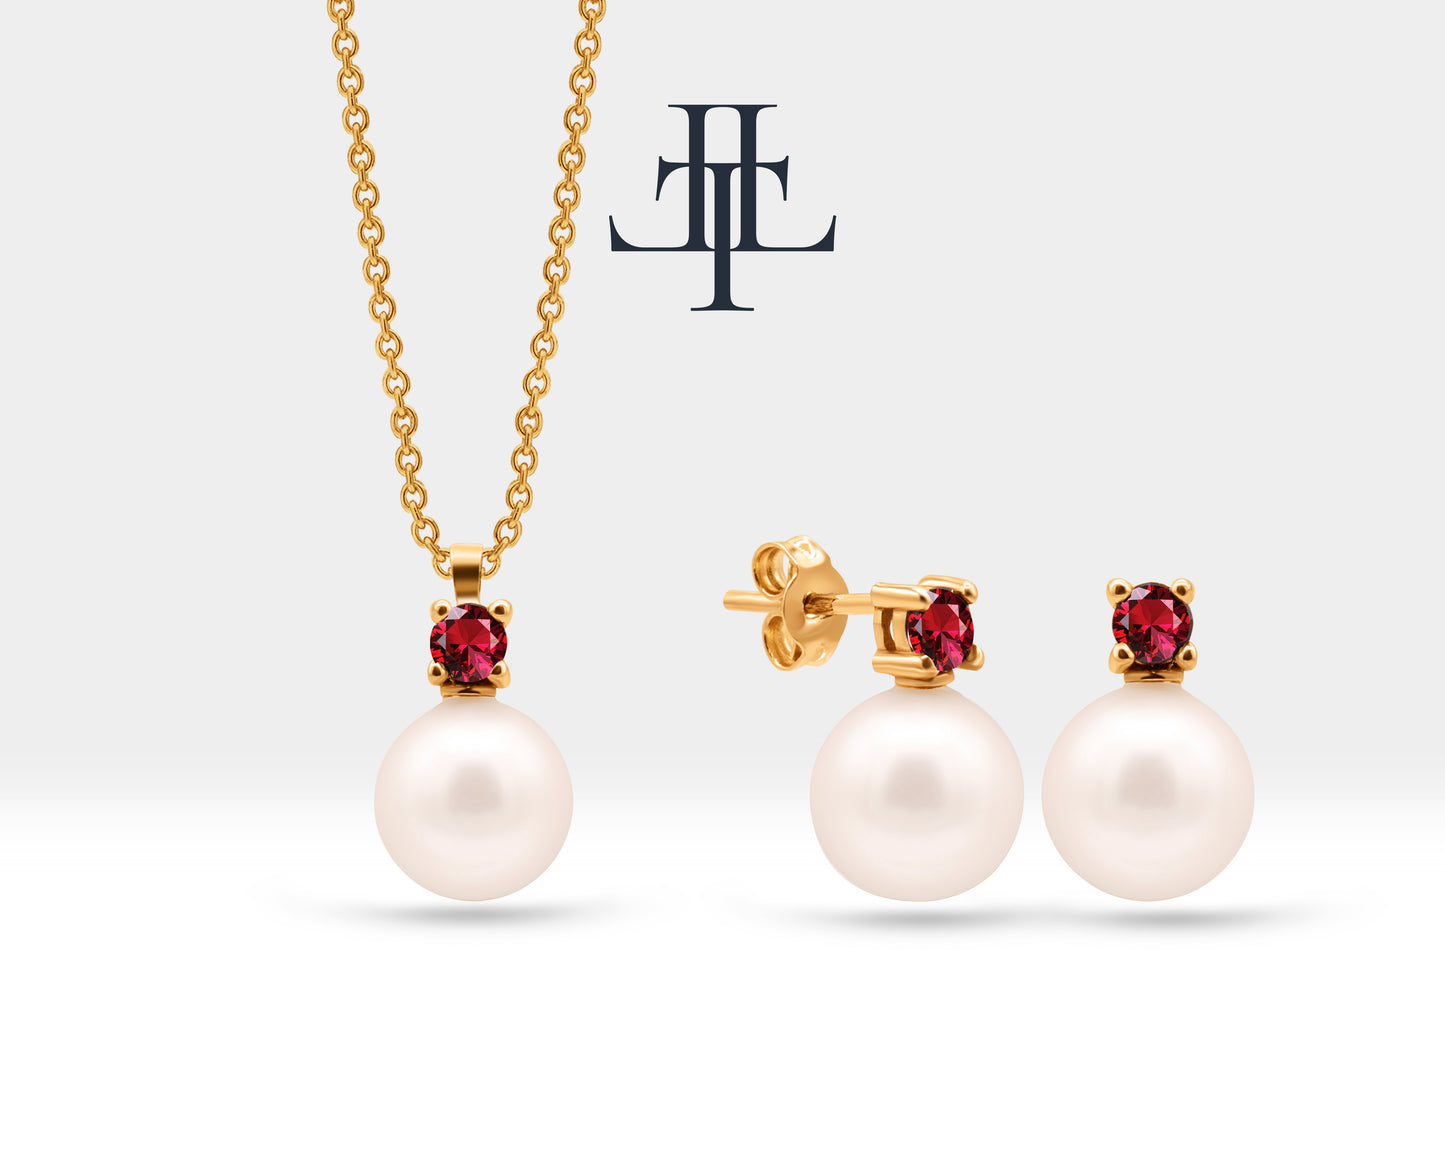 Bridal Jewelry Set of Pearl Earrings and Necklace Set in 14K Solid Gold Jewelry Set with Ruby and Natural Pearl Stud Earrings | LS00014PR